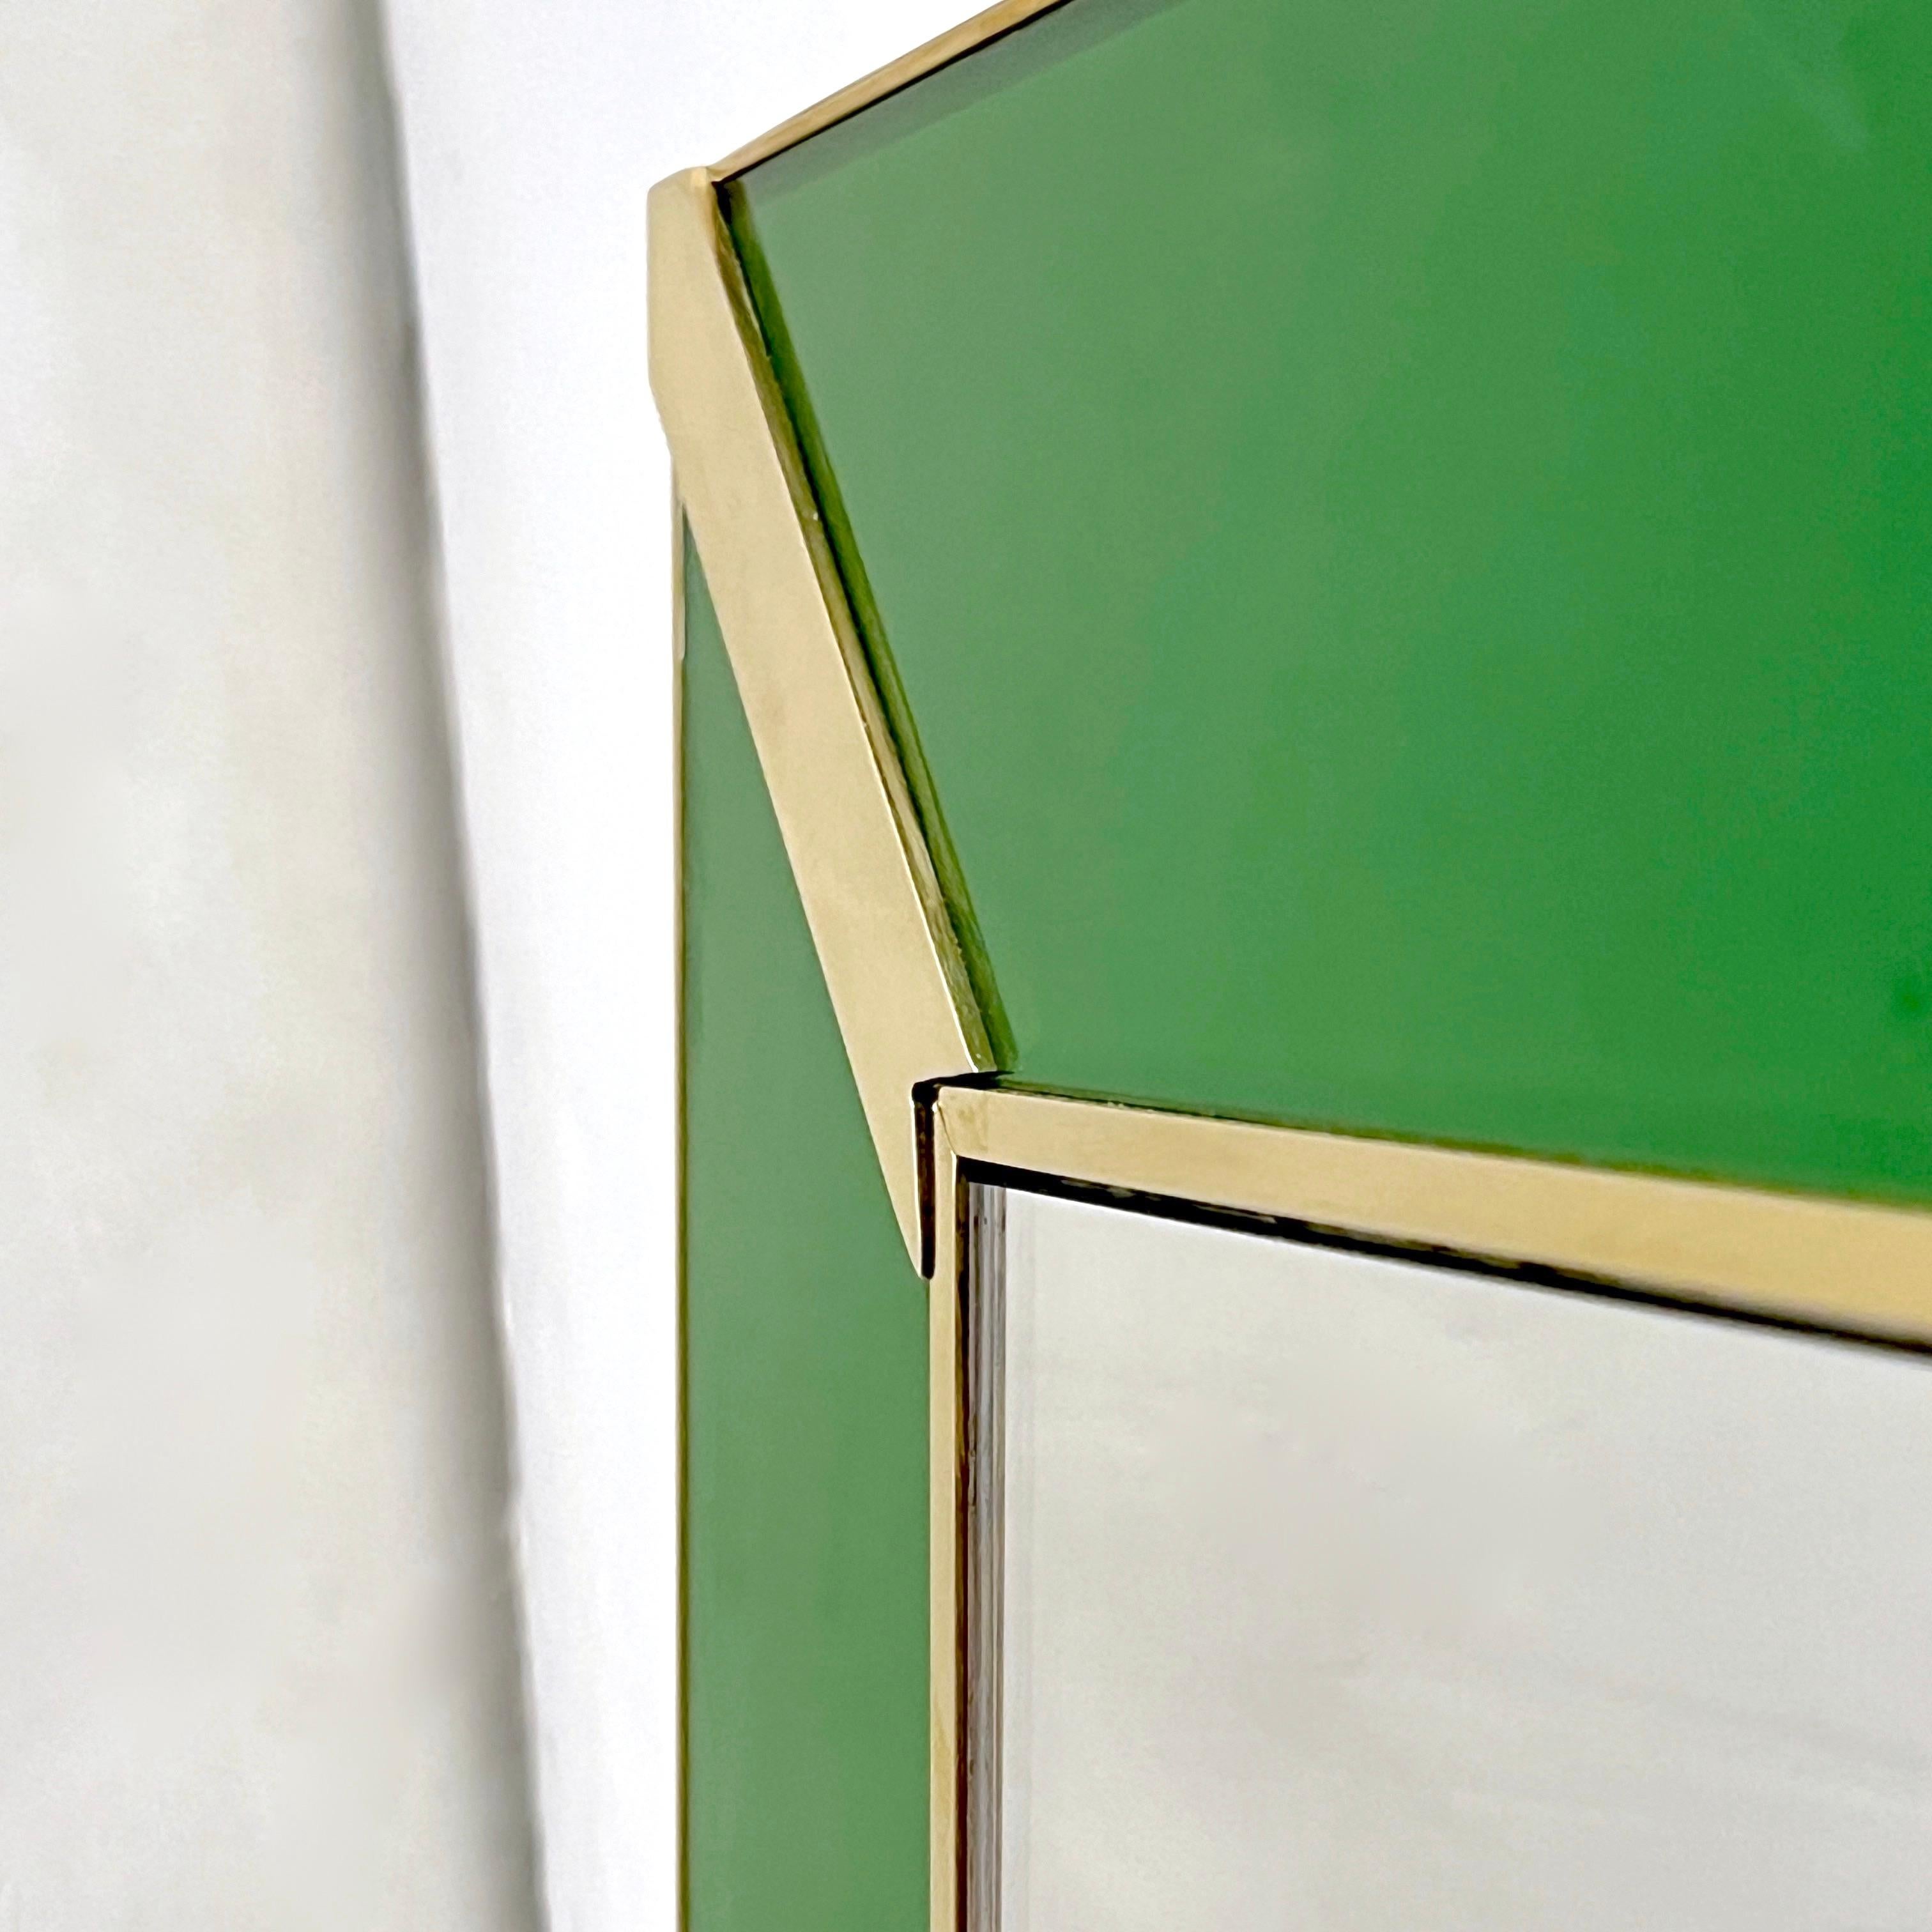 Contemporary Italian Minimalist Design Green Glass Mirror with Brass Accents For Sale 1